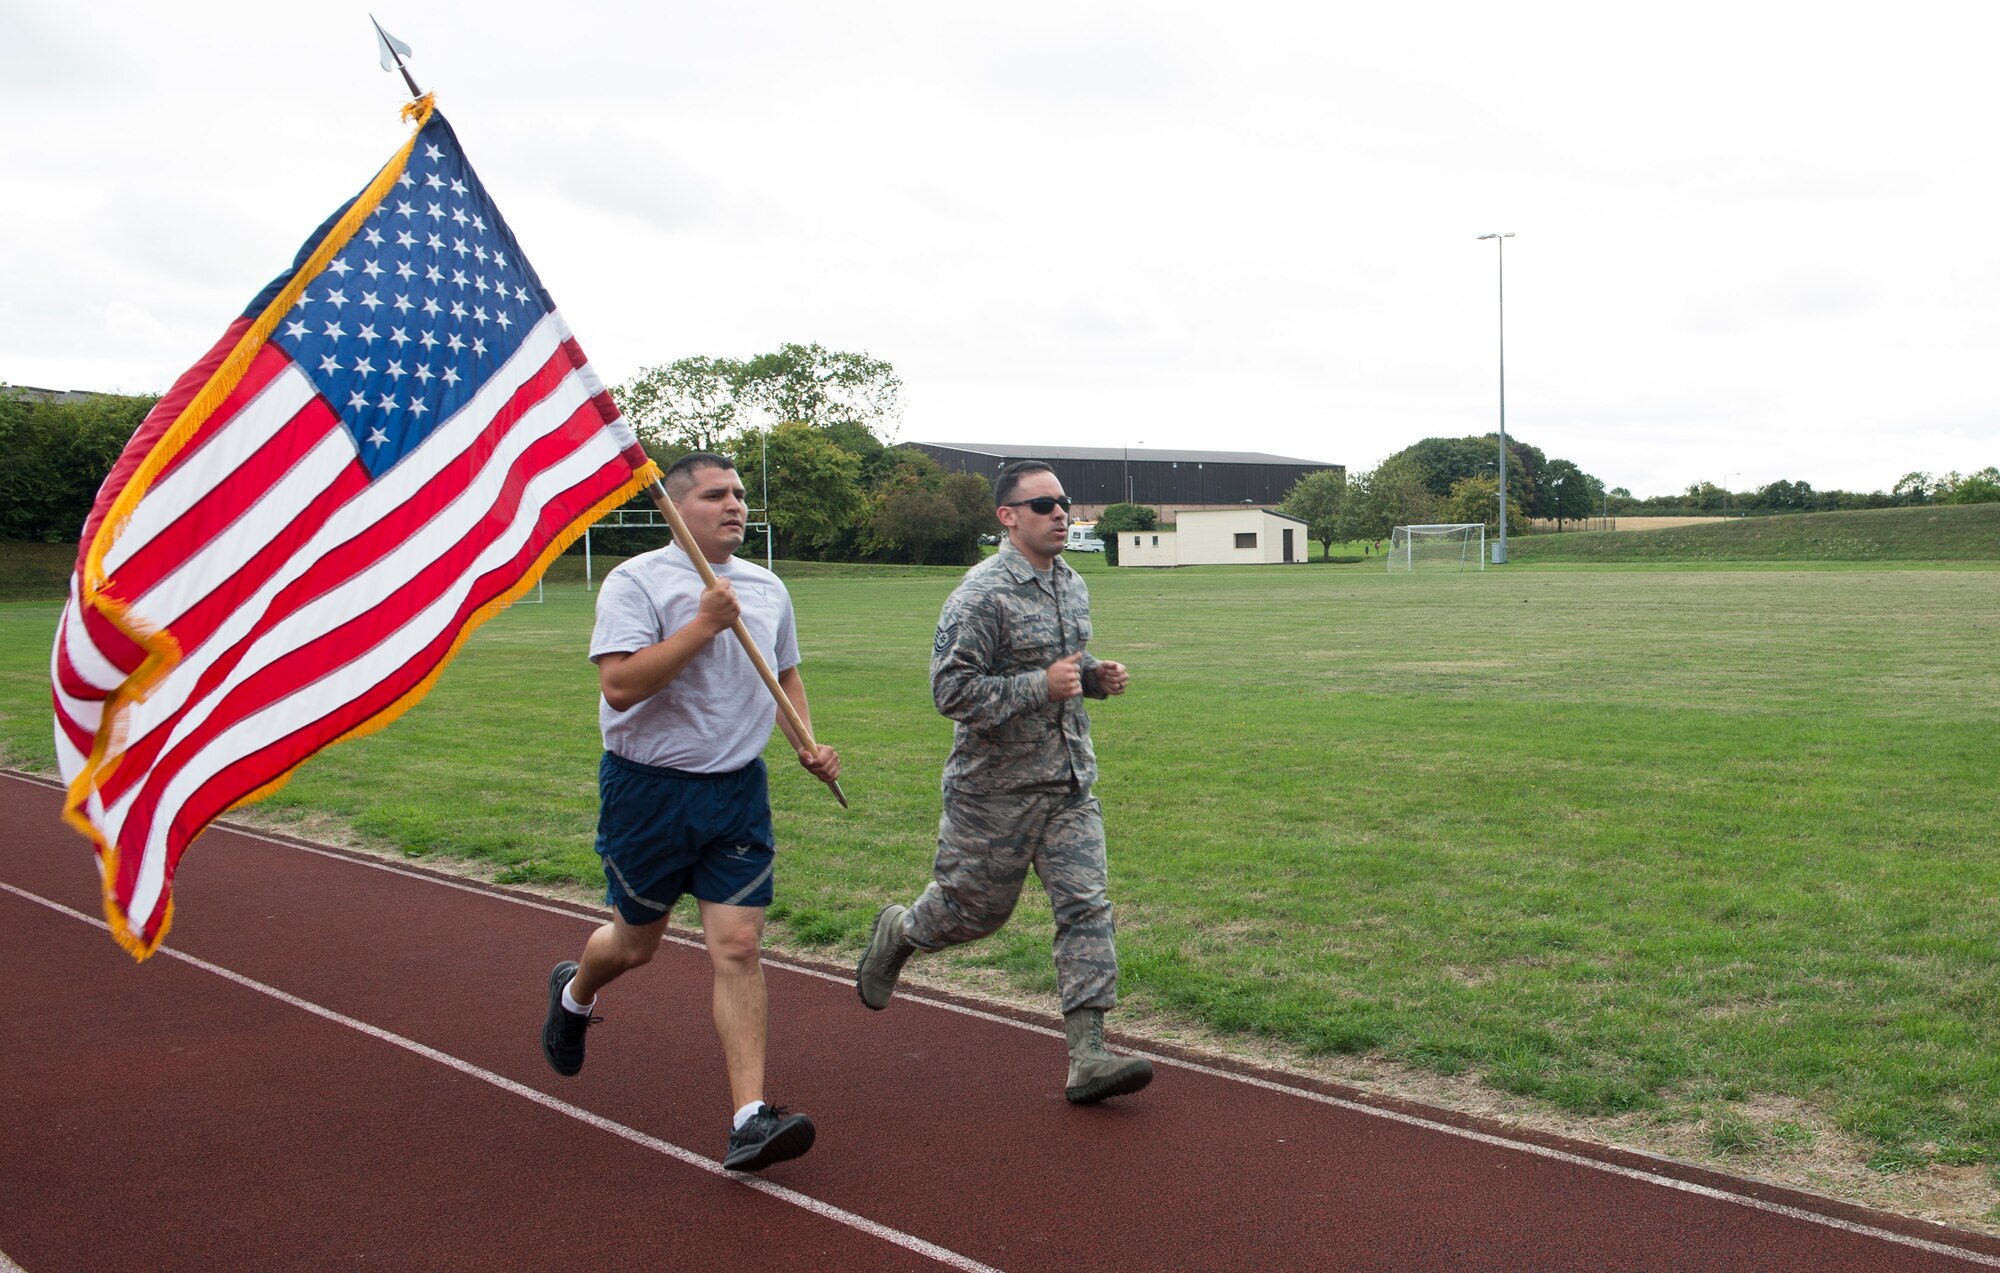 Airmen run and carry the United States flag in honor of the fallen of Sept. 11 at RAF Croughton, United Kingdom, Sept. 11, 2018. The U.S. flag was always carried by various base agencies throughout the day. (U.S. Air Force photo by Senior Airman Chase Sousa)